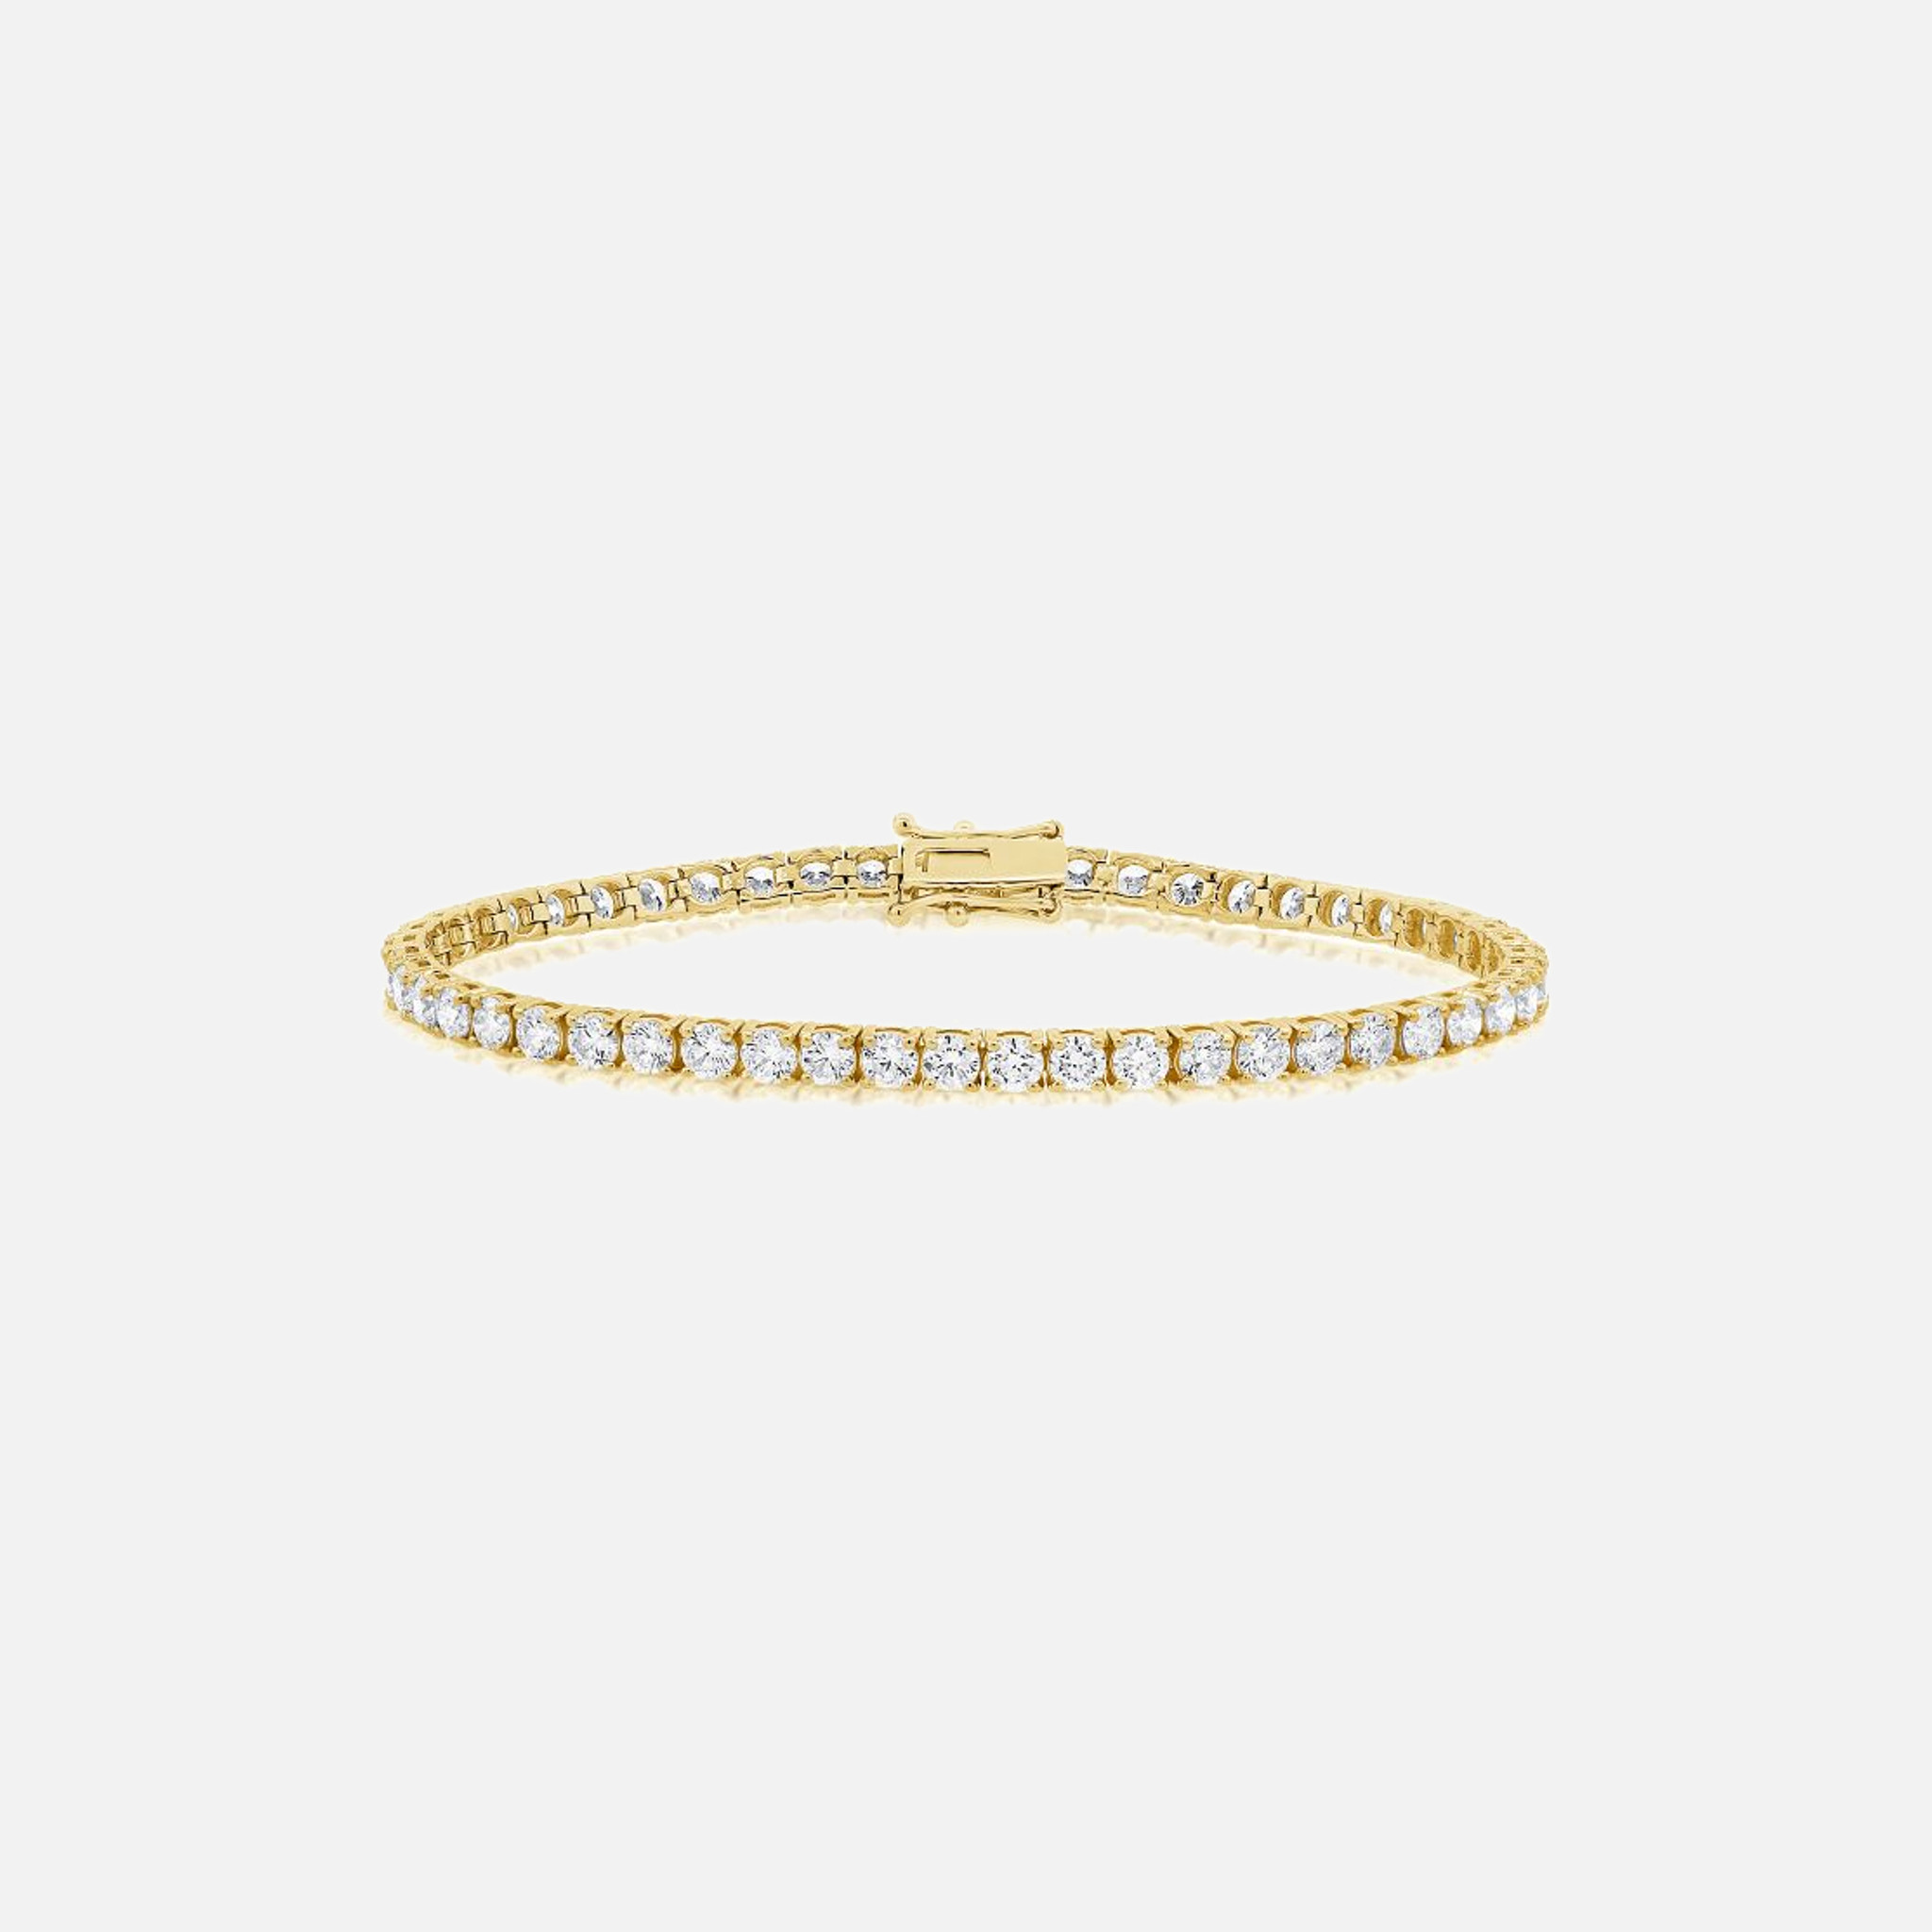 A gold diamond tennis bracelet featuring a cheerful line of brilliant cut white diamonds totaling 1.49 carats. The bracelet is crafted in sleek and shiny yellow gold and fastened securely with a box lock clasp.